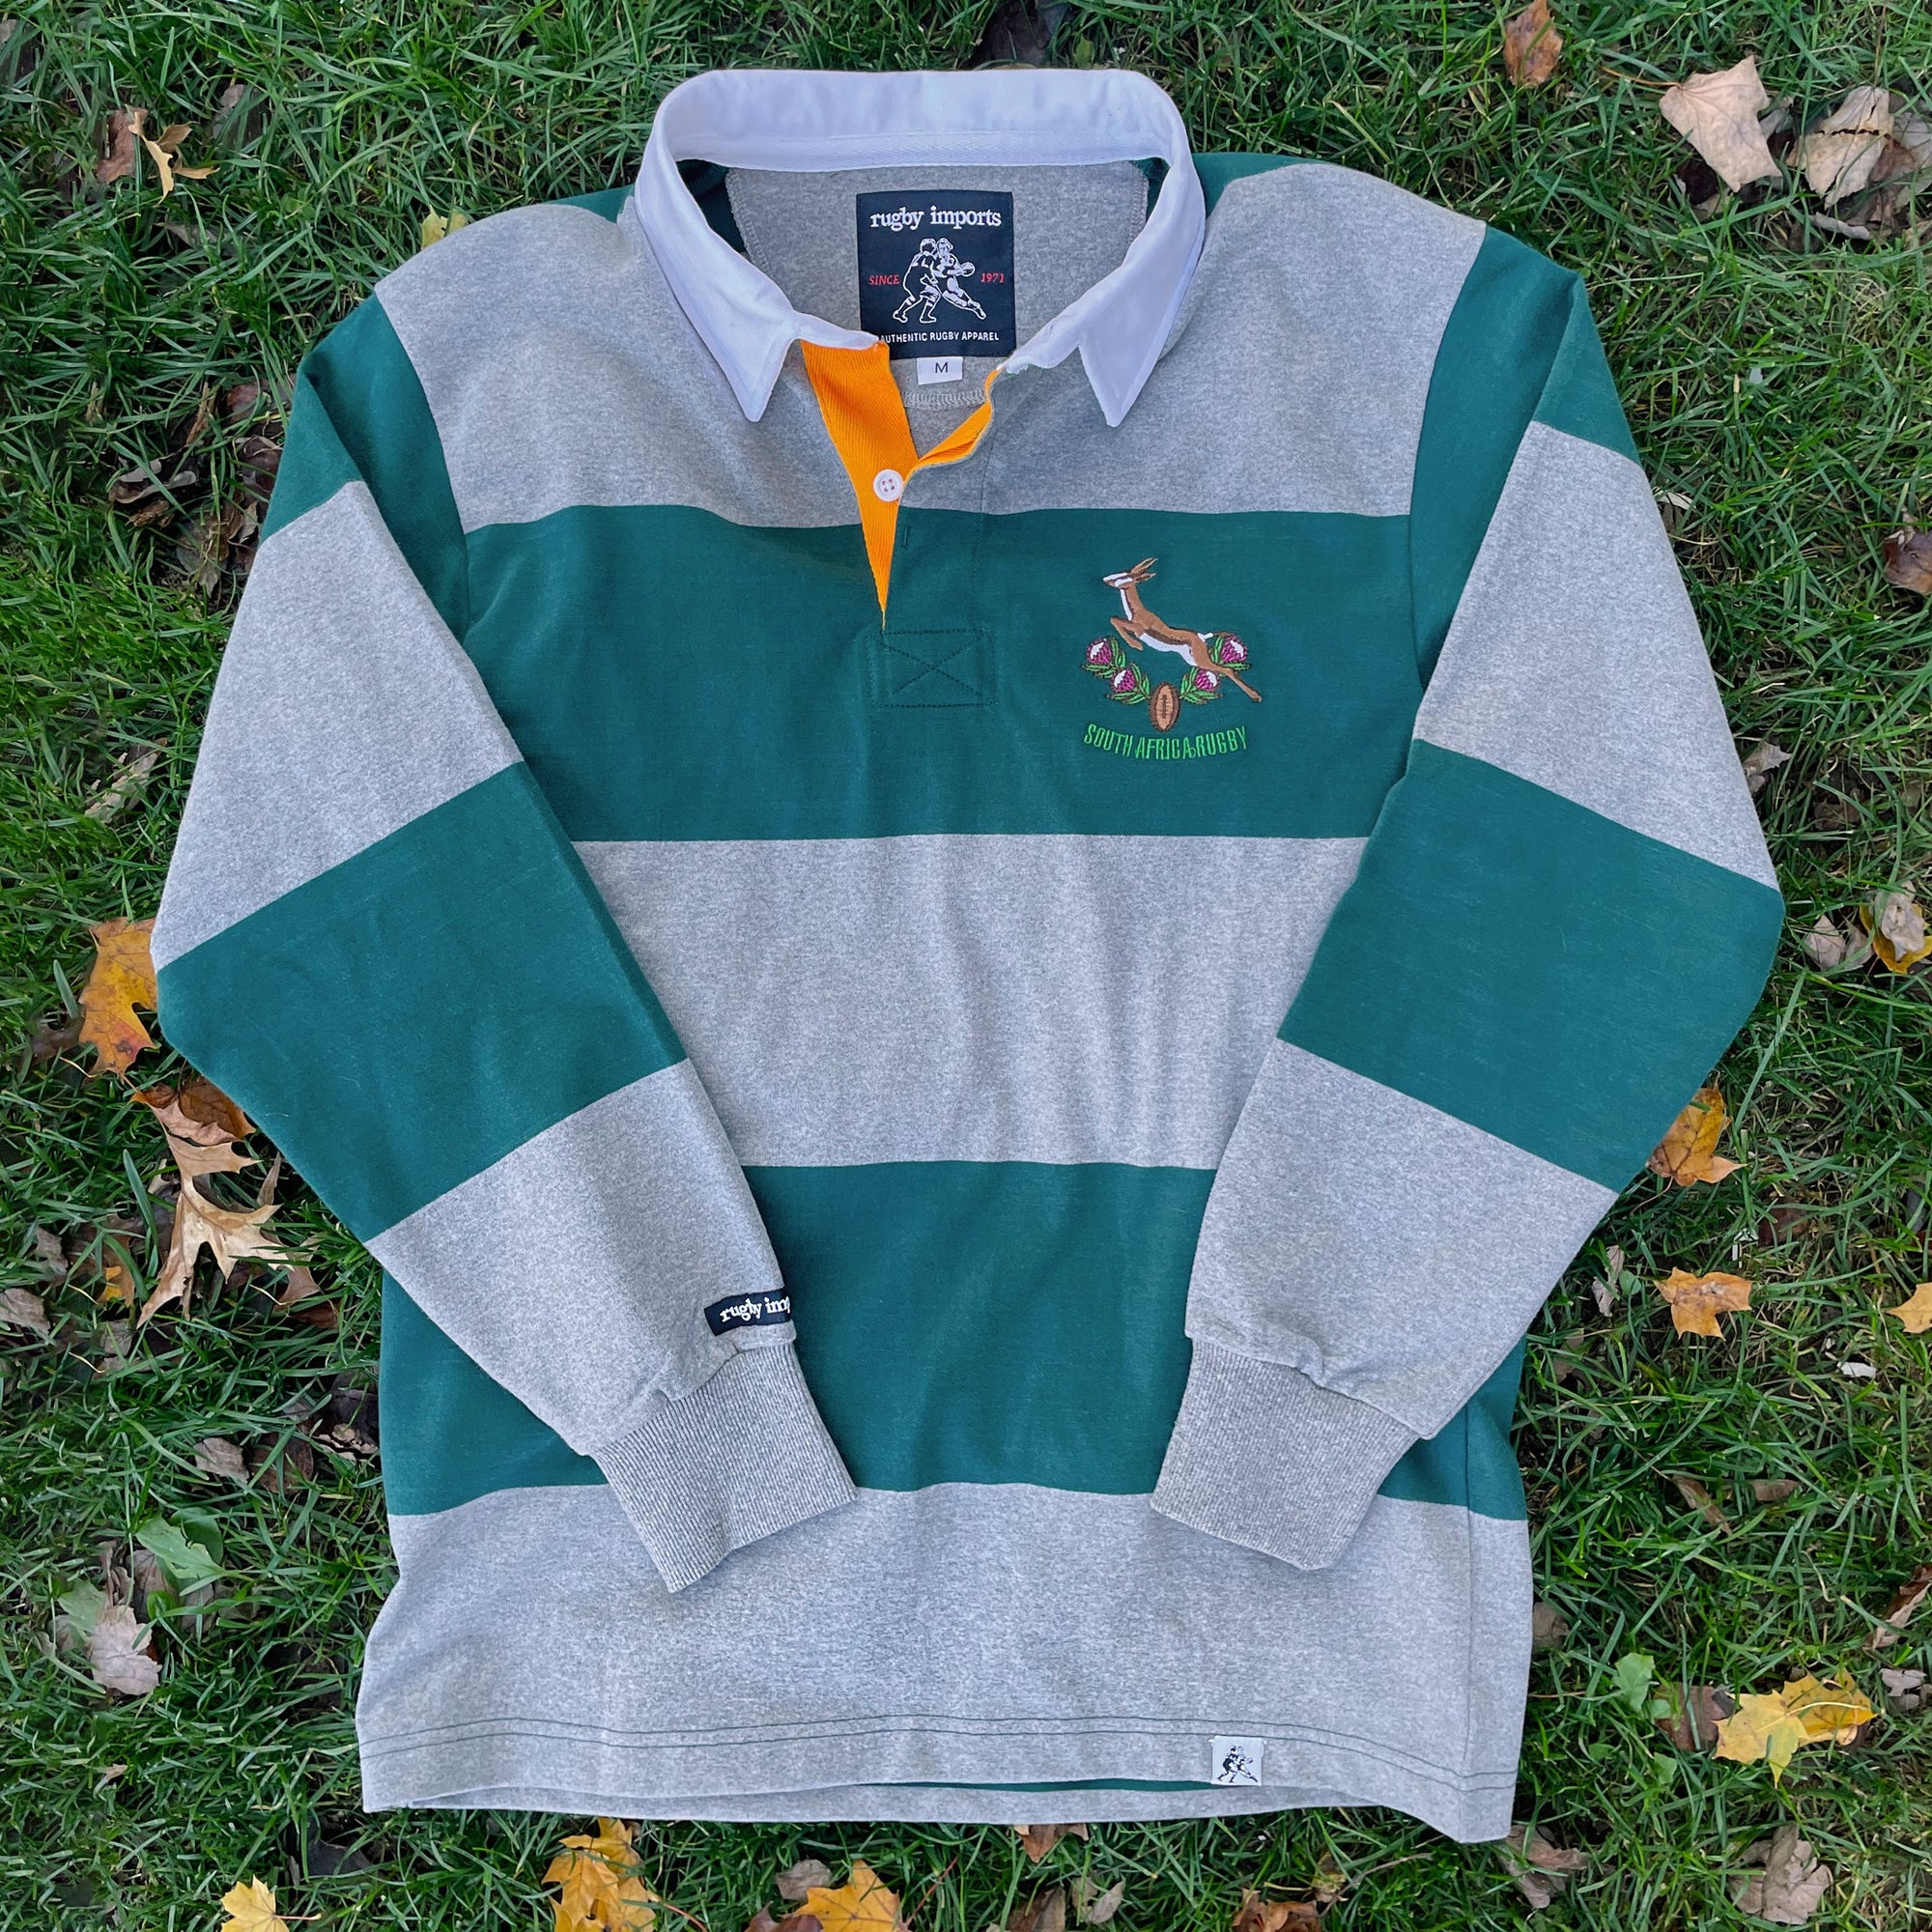  Rugby Imports Argentina Old Style Jersey (Small) Sky